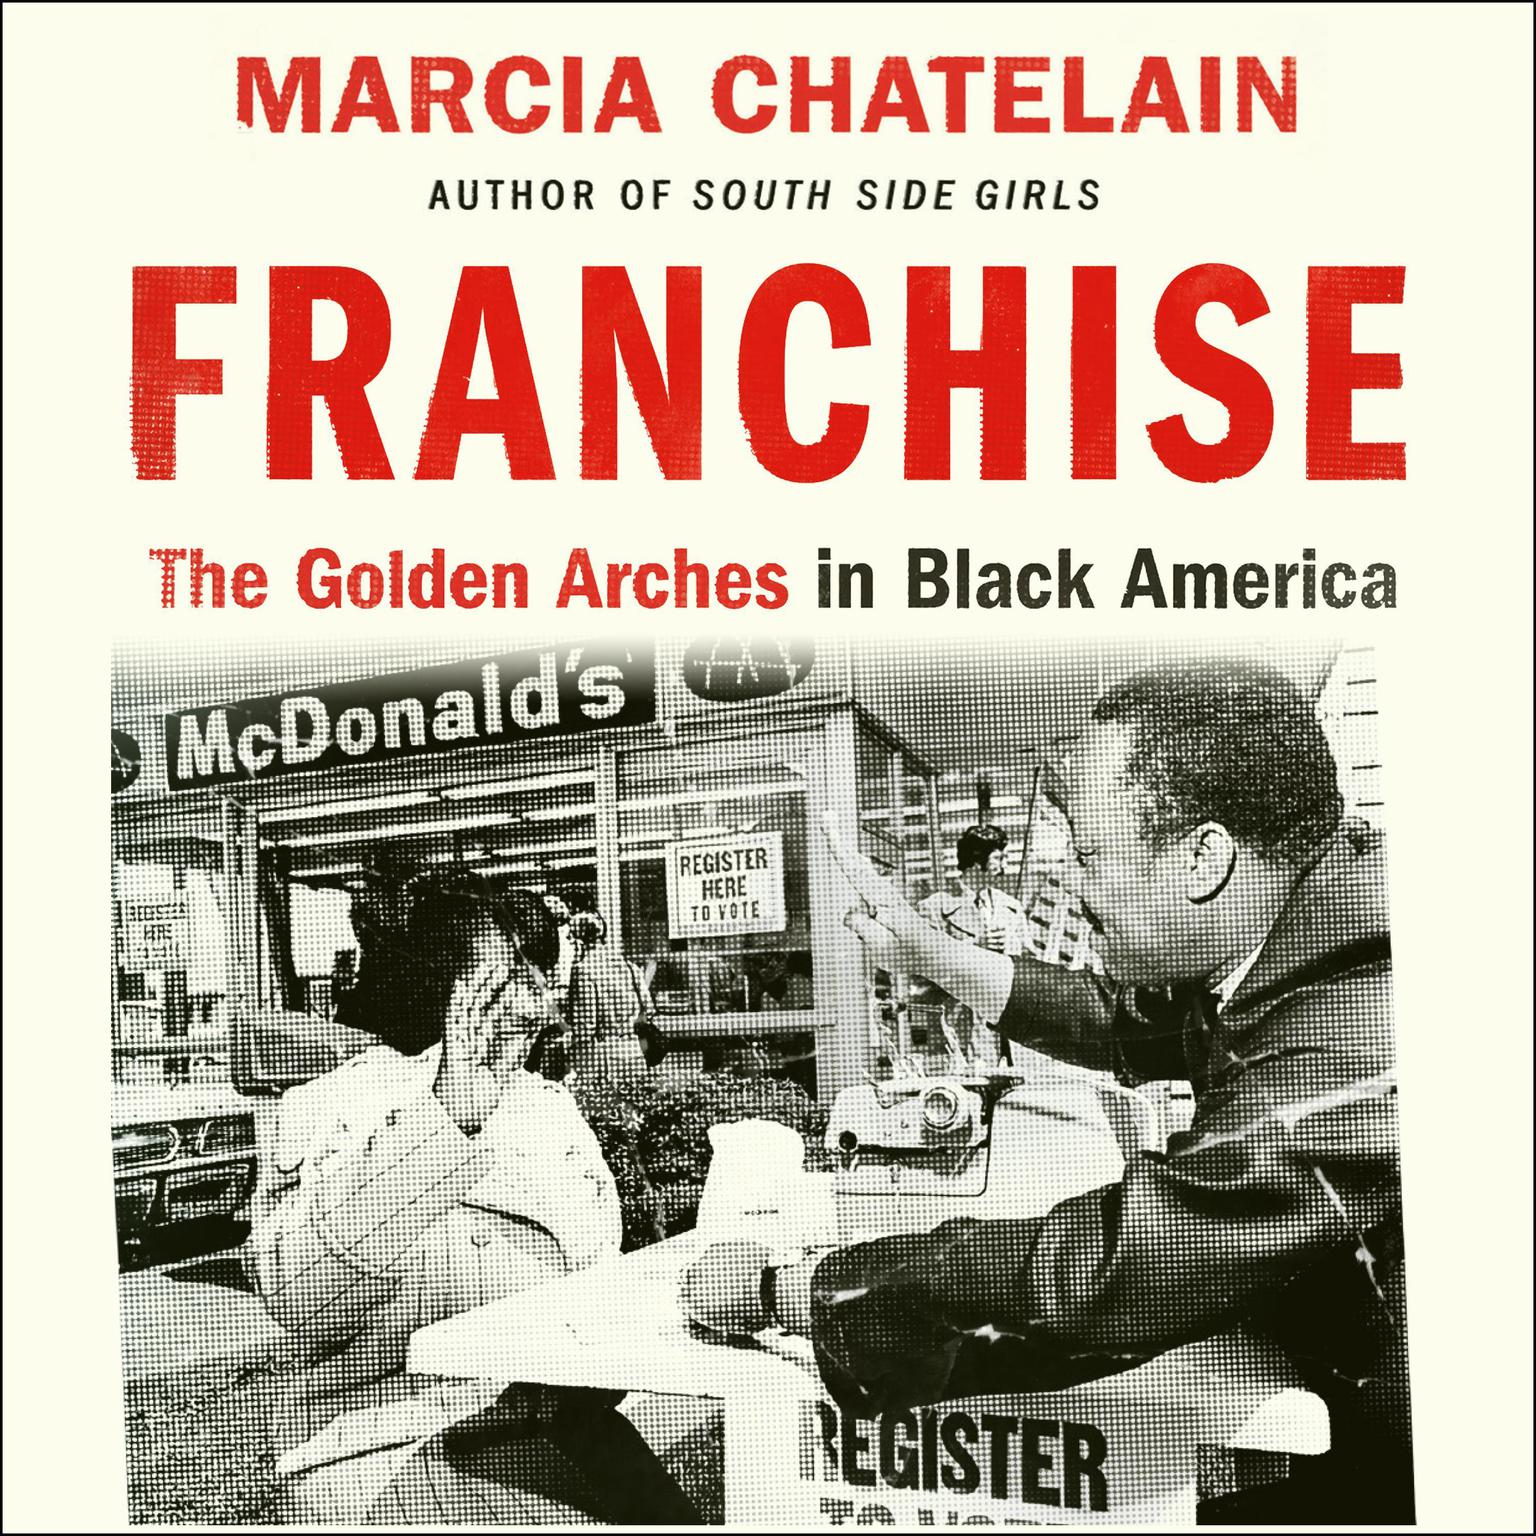 Franchise: The Golden Arches in Black America Audiobook, by Marcia Chatelain